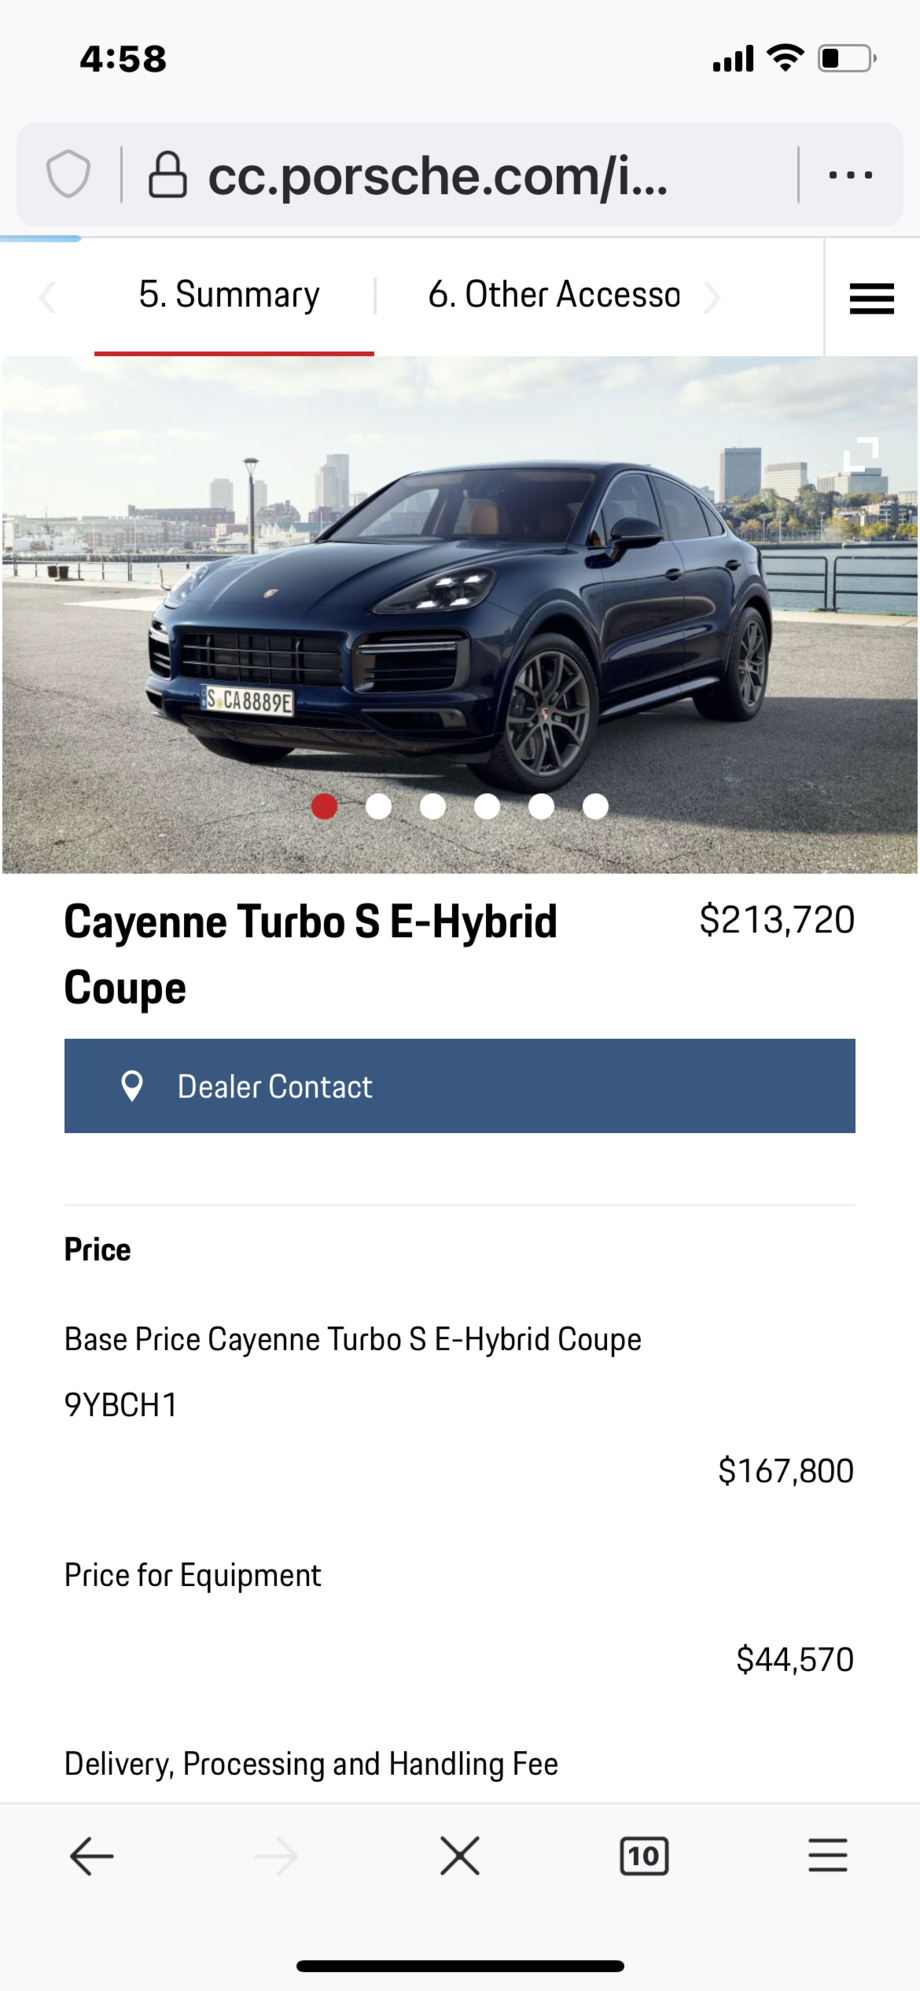 2021 Porsche Cayenne - 2021 Cayenne Turbo SE Hybrid Coupe - New or Used - 8 cyl - AWD - Automatic - SUV - Blue - San Francisco, CA 94115, United States